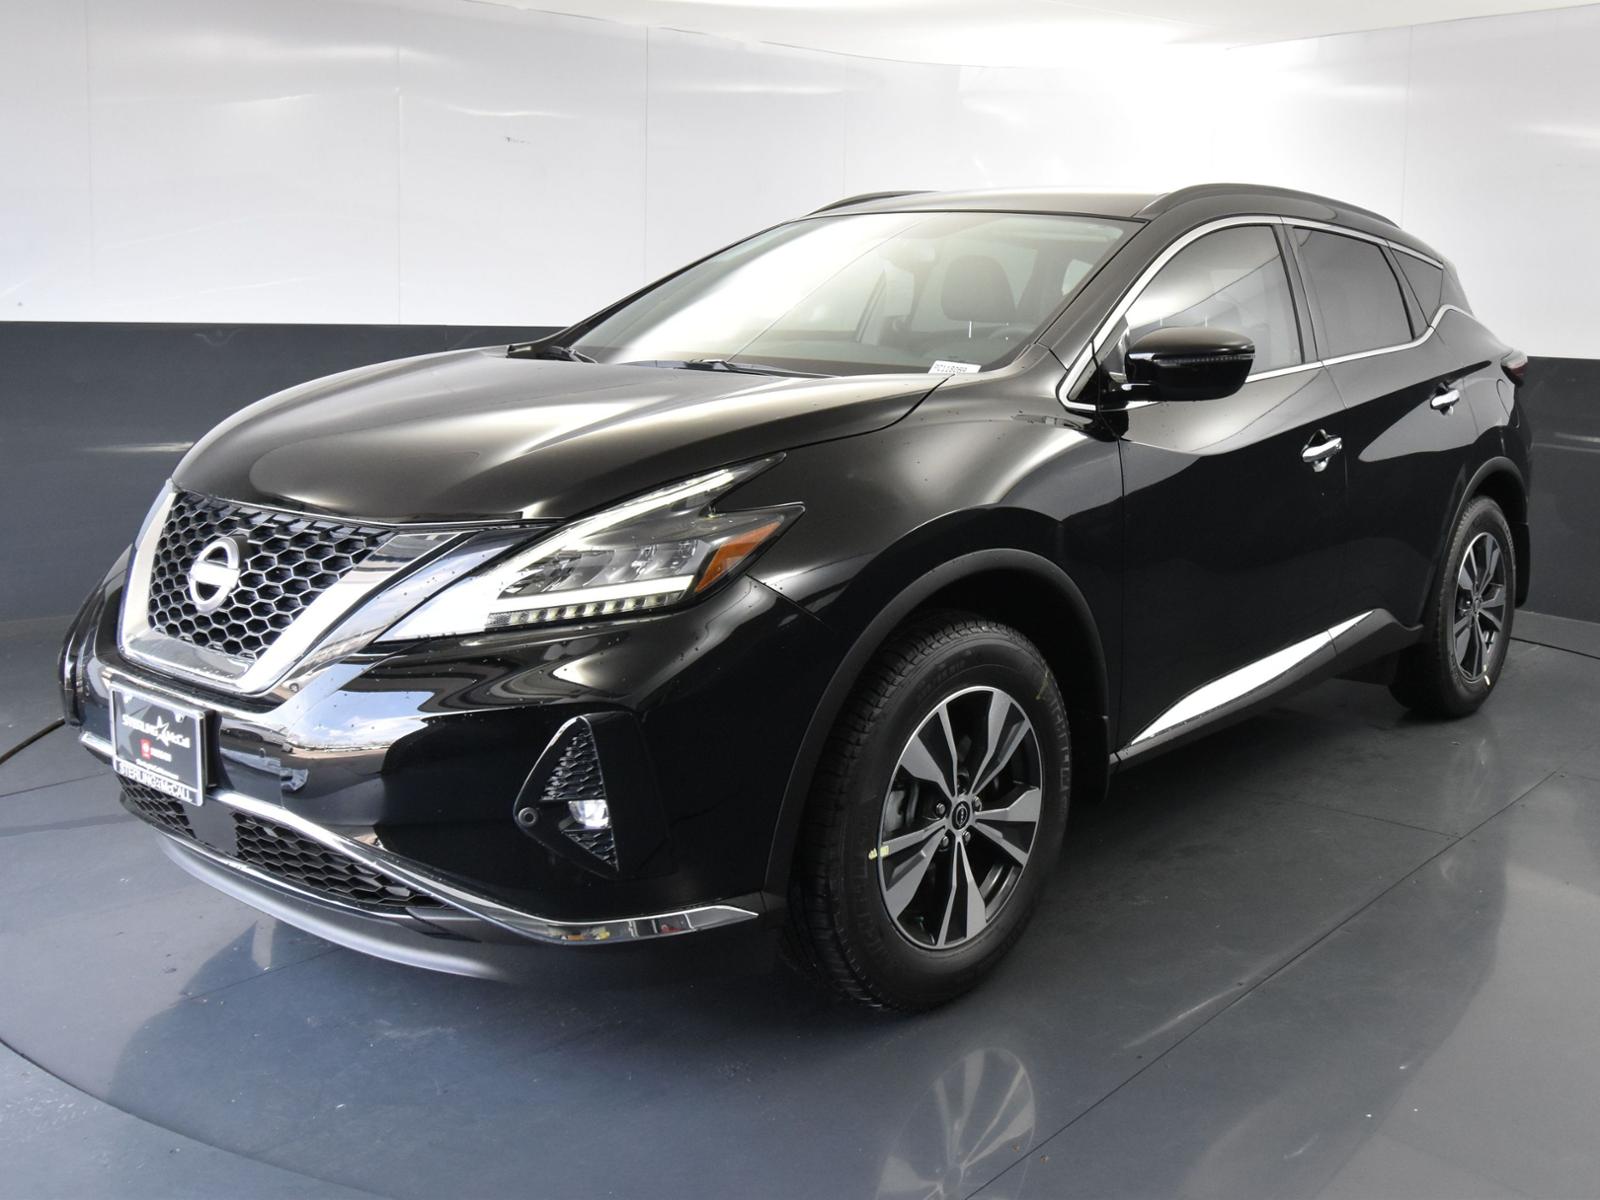 New 2023 Nissan Murano FWD SV Sport Utility in Richardson #PC118069 |  Courtesy Nissan